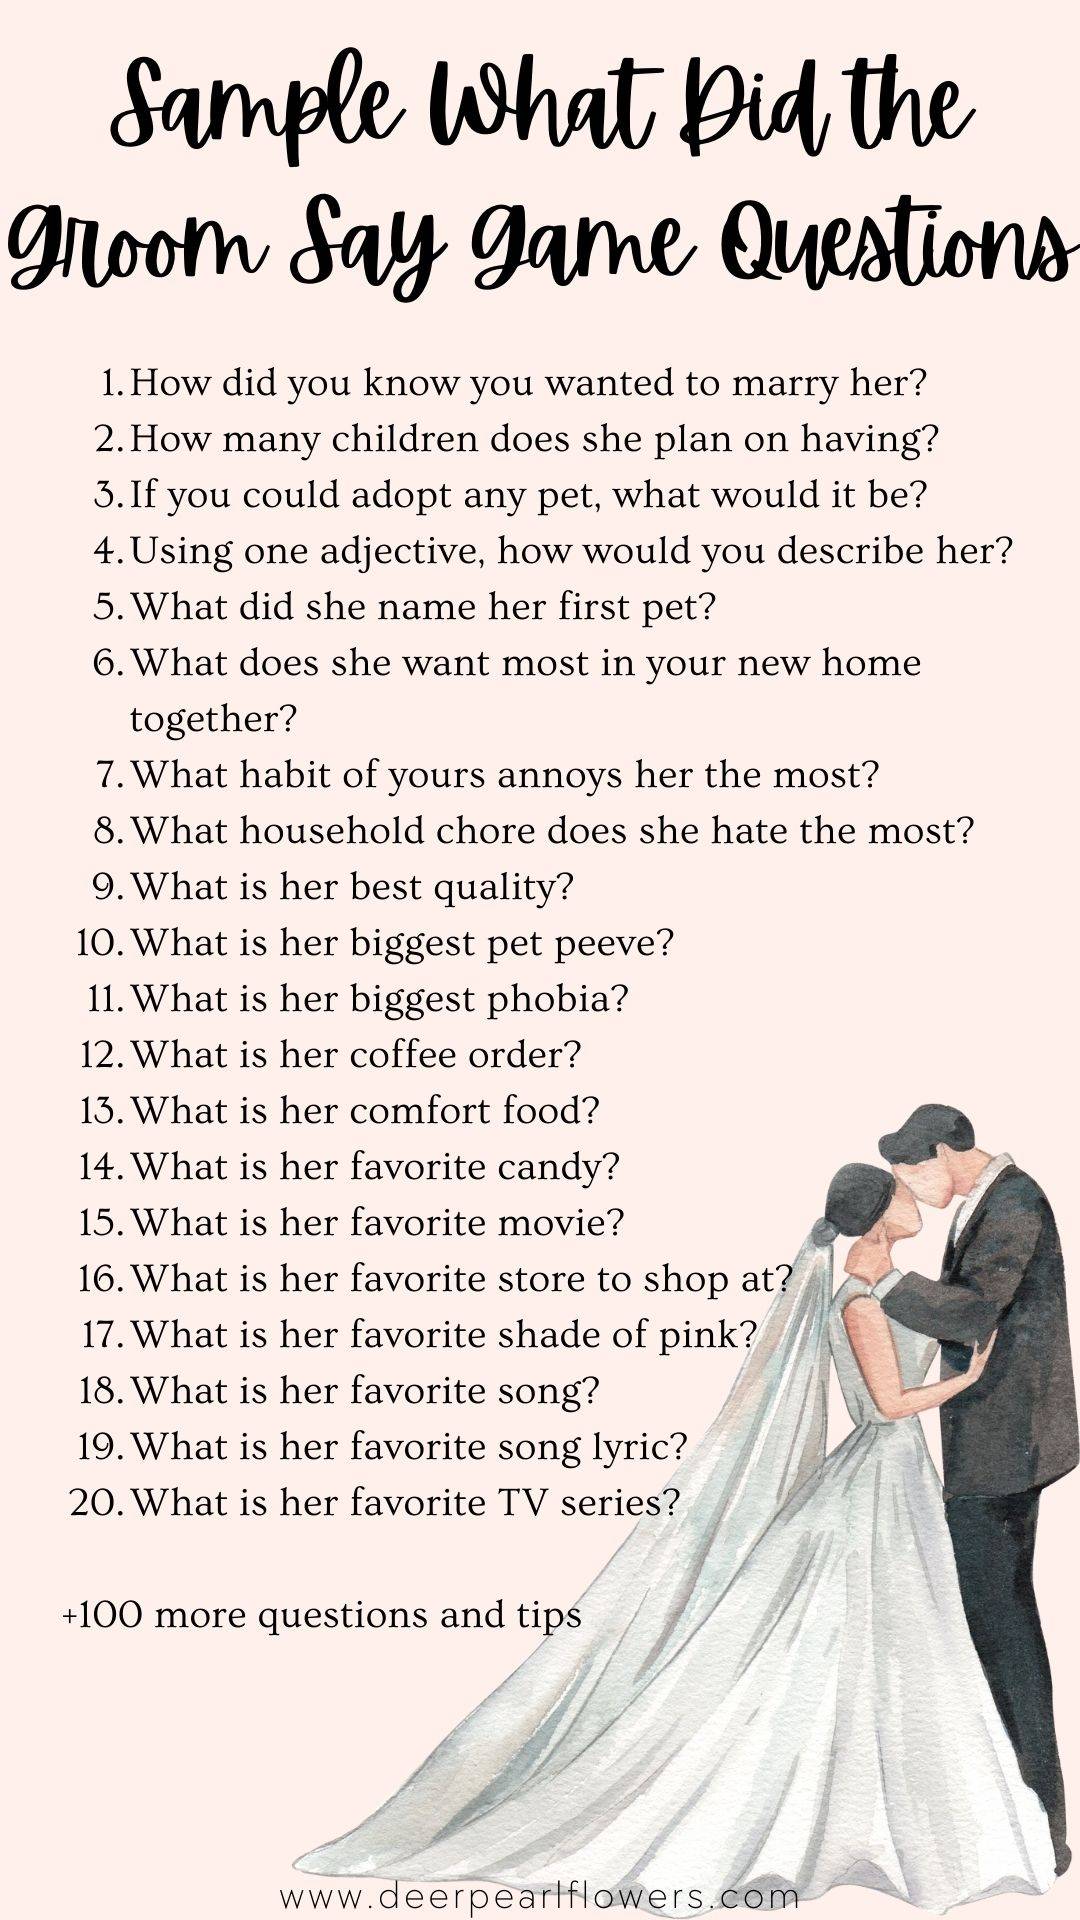 Sample What Did the Groom Say Game Questions